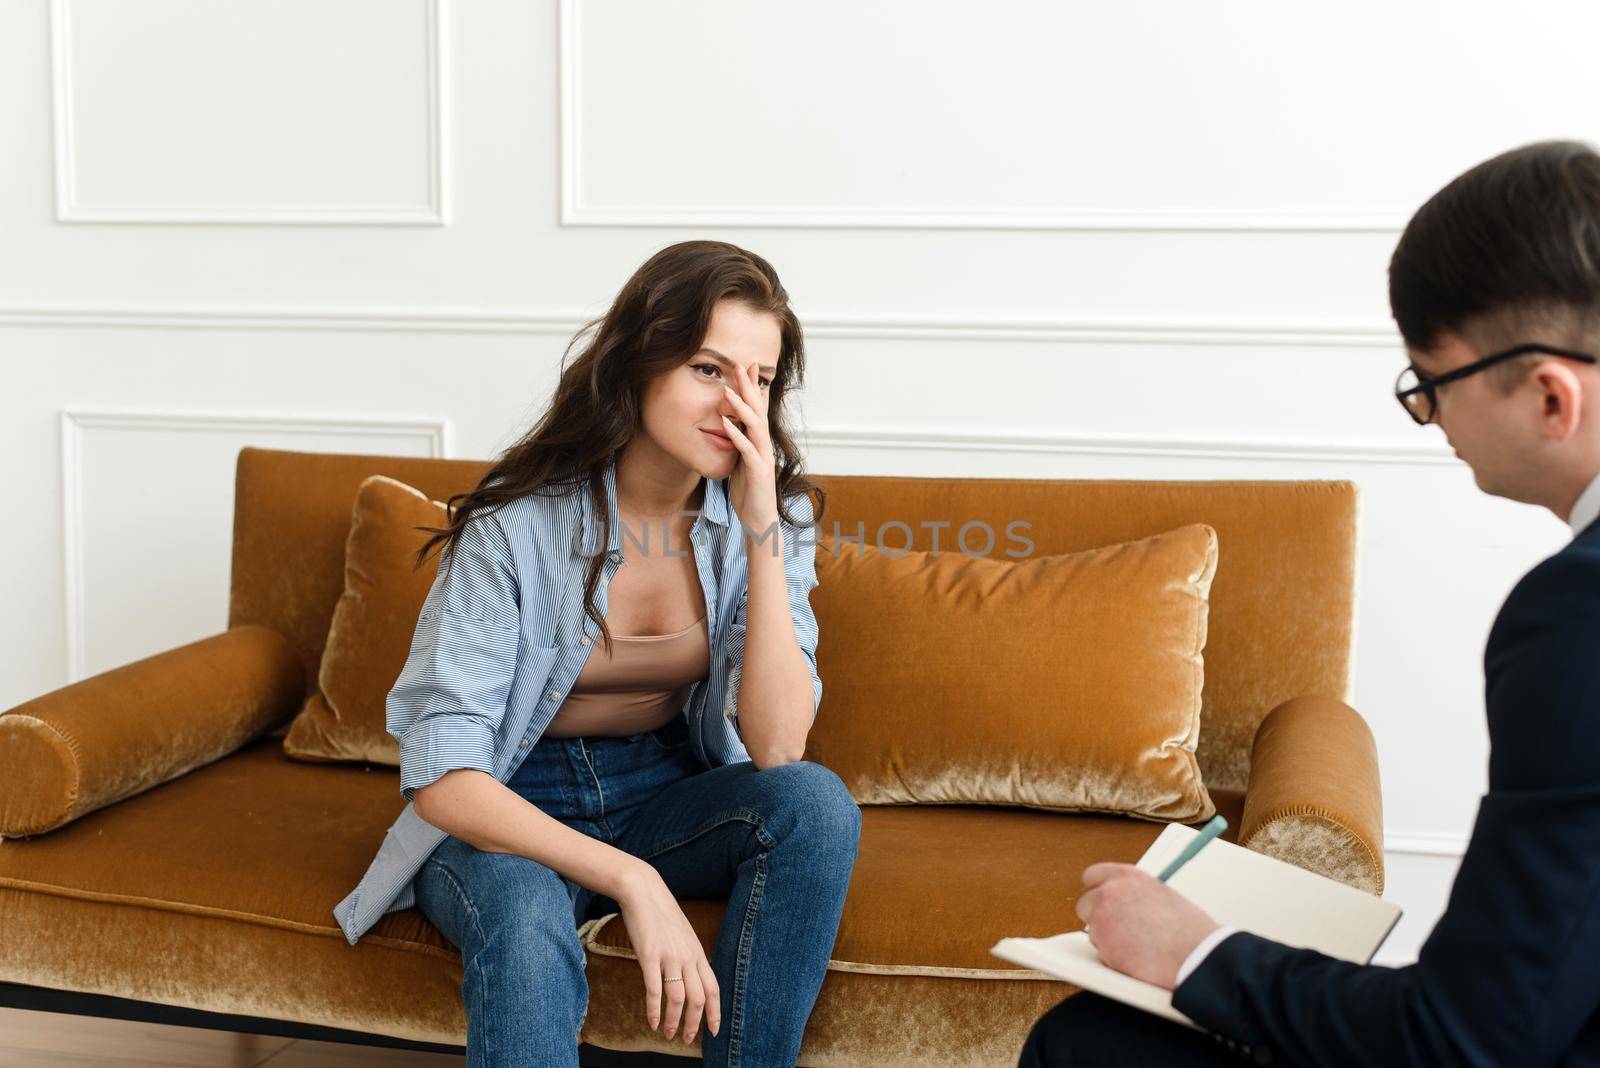 A young woman at a psychiatrist's or psychologist's appointment is worried, holds her hands to her face and tries to talk about her problems